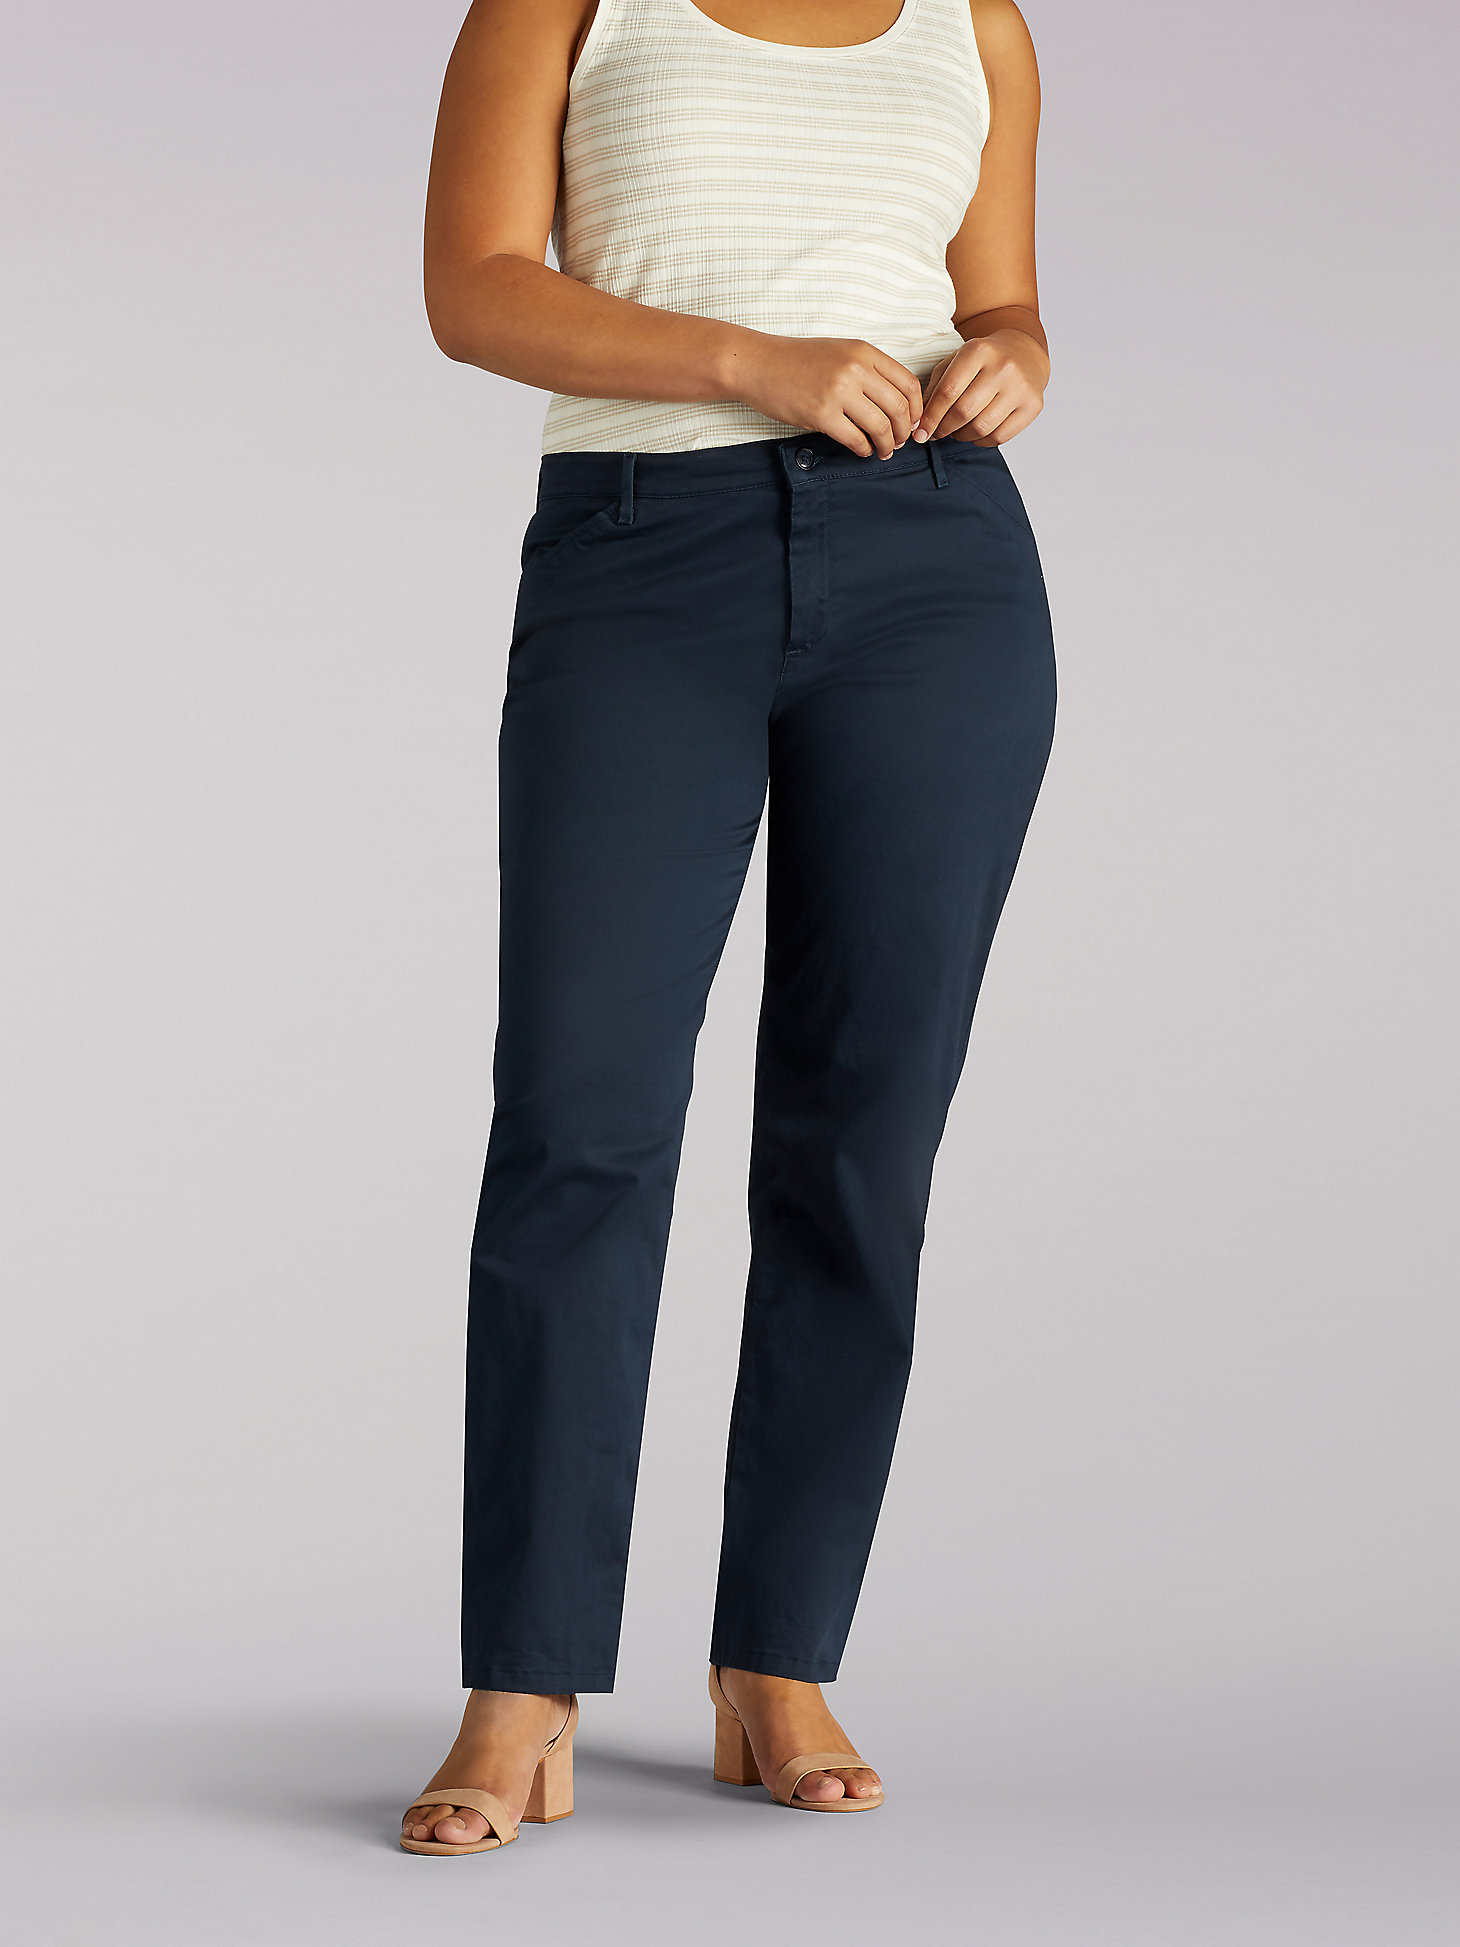 Women’s Relaxed Fit Straight Leg Pant (All Day Pant) (Plus) in Imperial Blue main view